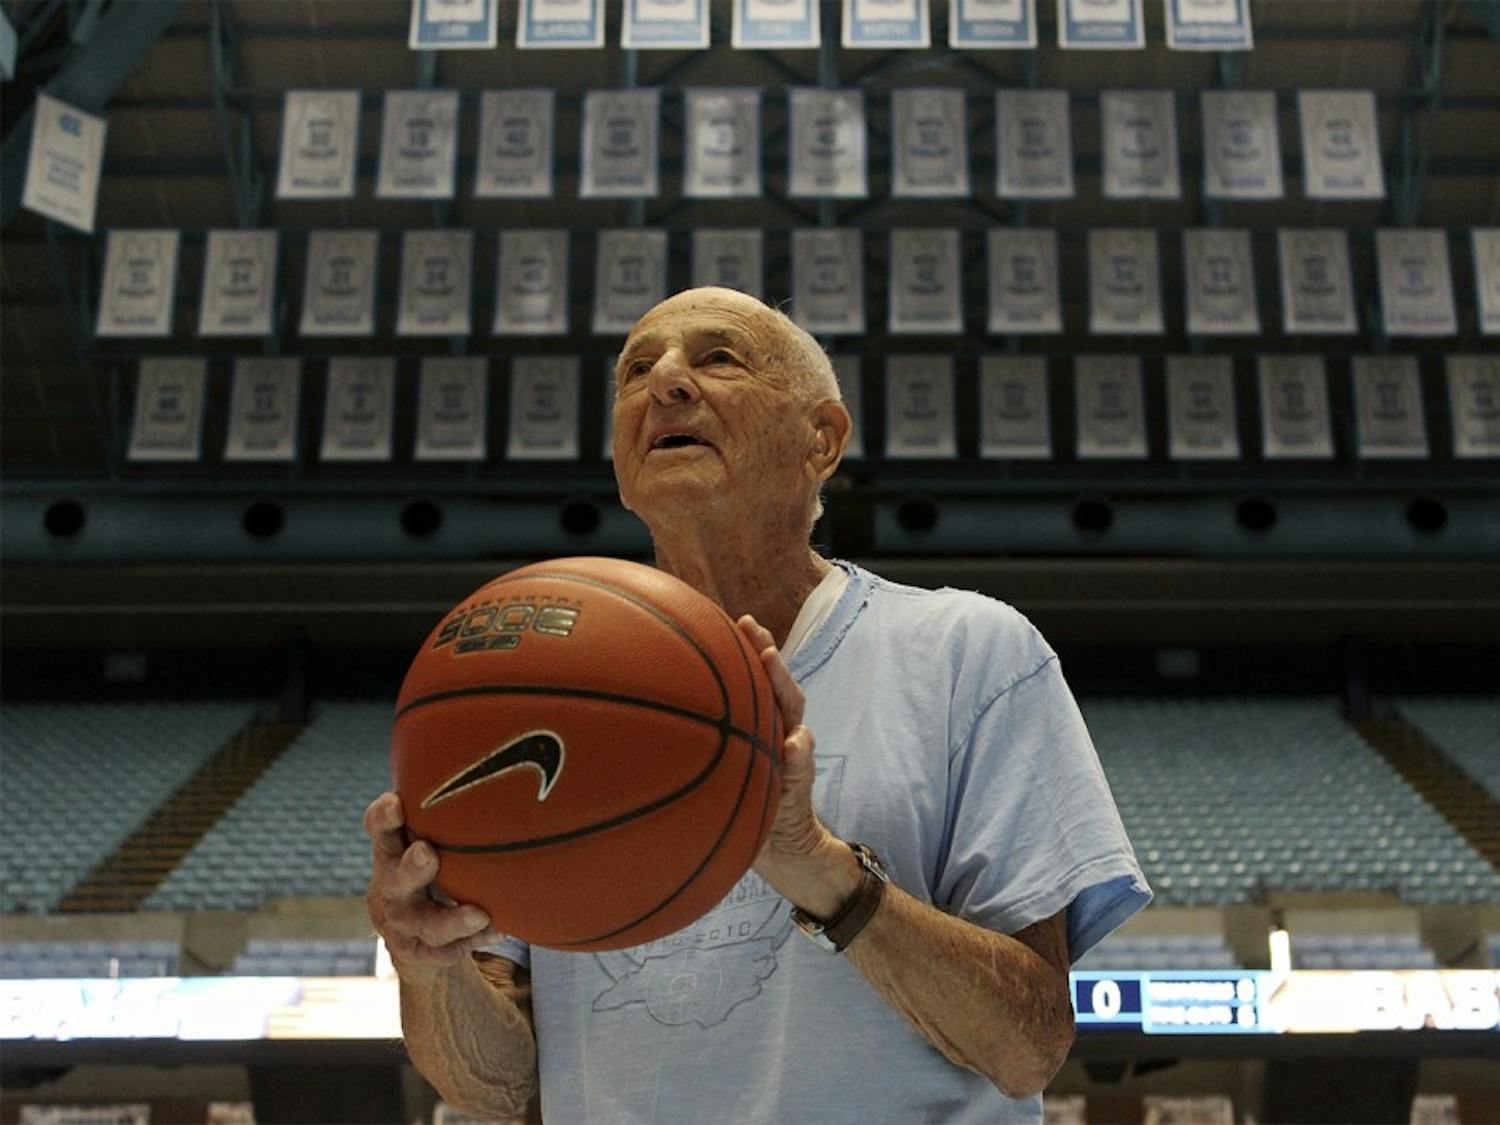 Bob Gersten, the oldest living Tar Heel basketball player, lines up on the paint in the Smith Center.